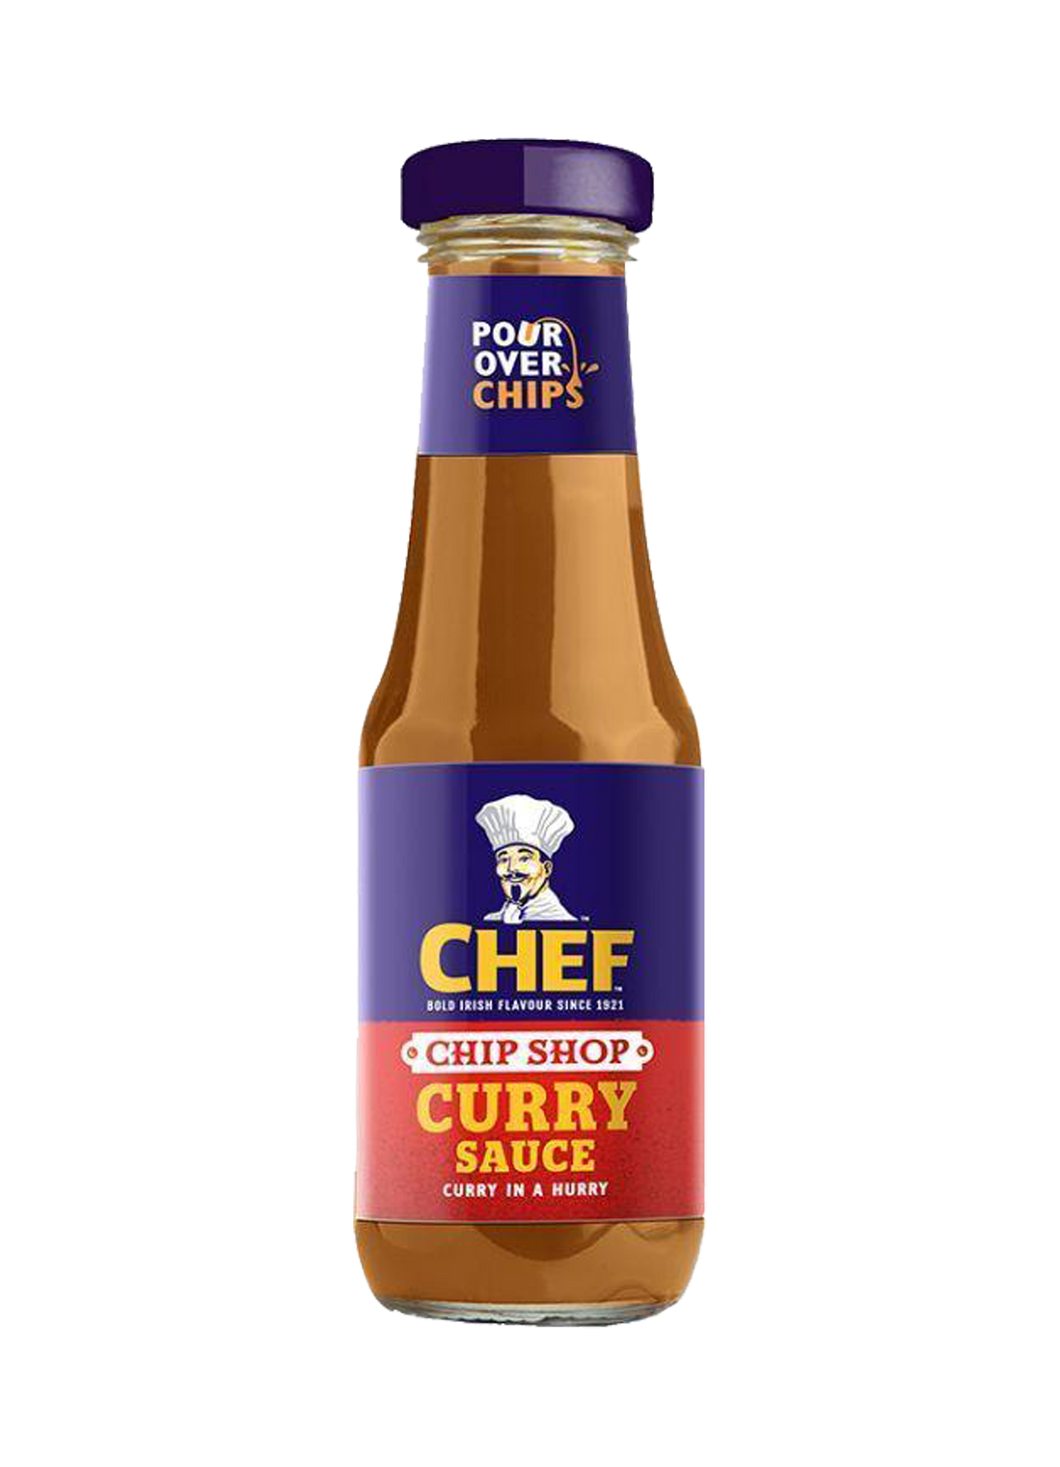 Chef Chip Shop Curry Sauce 325g